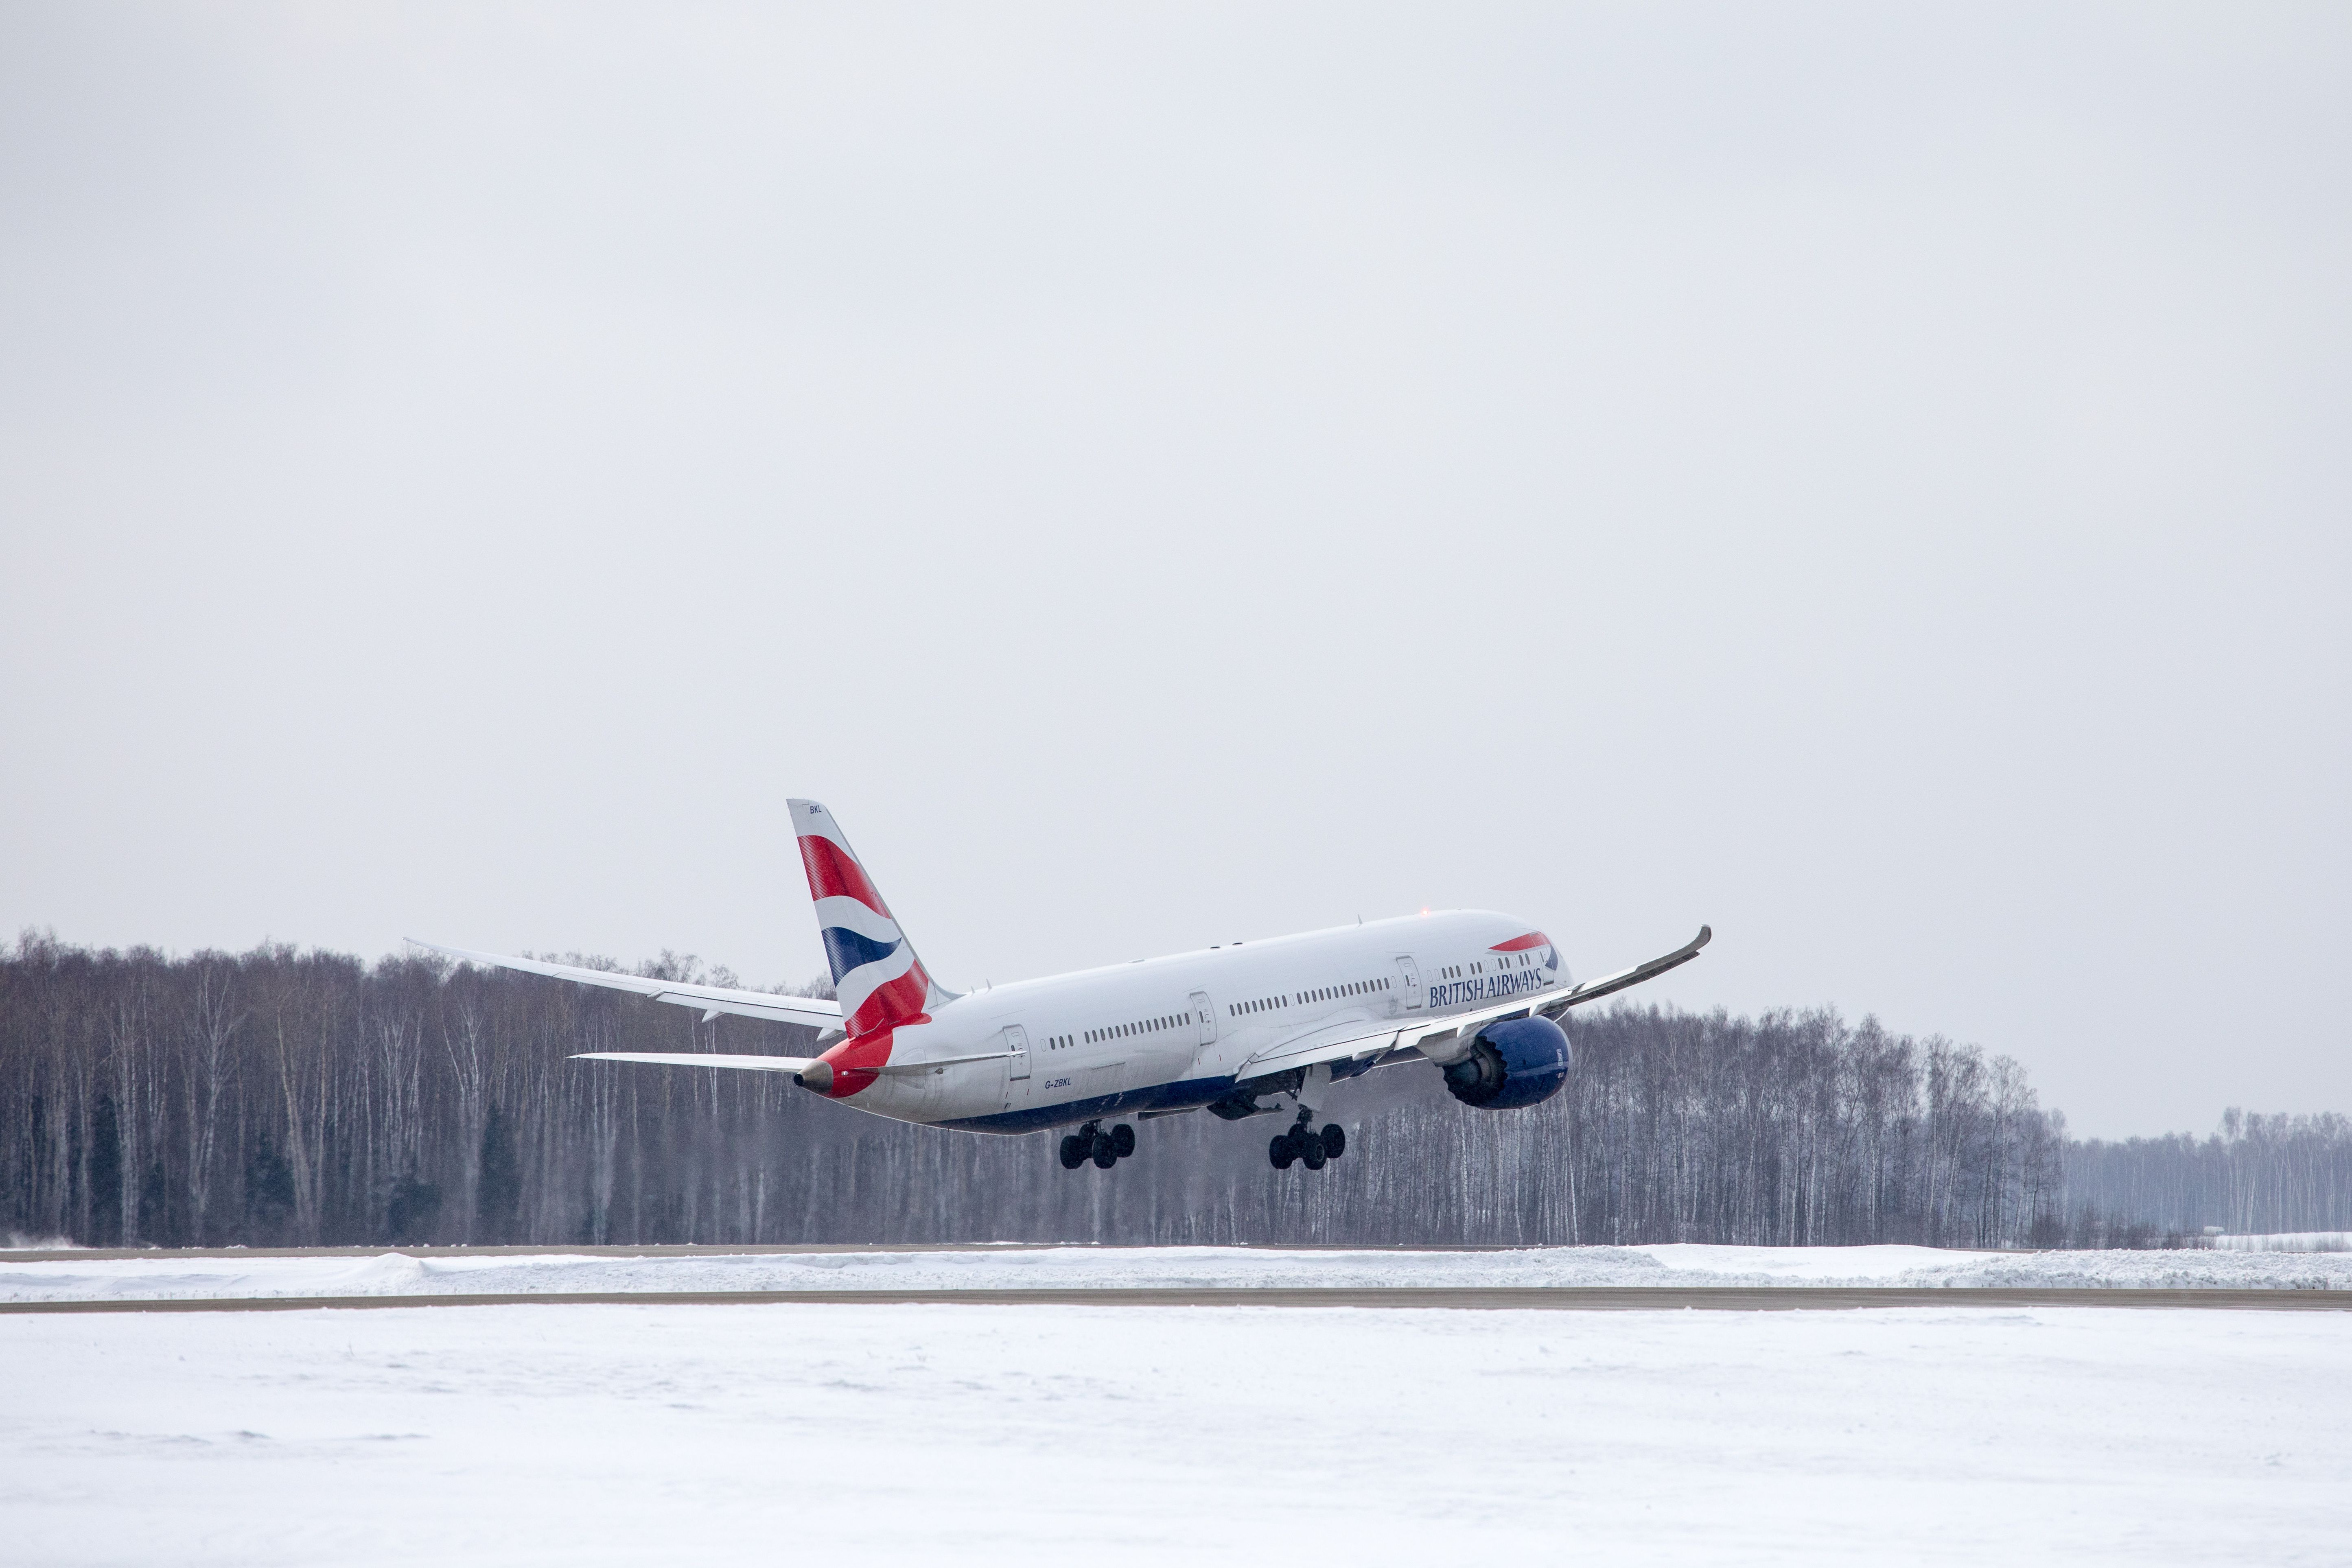 shutterstock_1069258064 - Boeing 787 Dreamliner rising from a snowy place